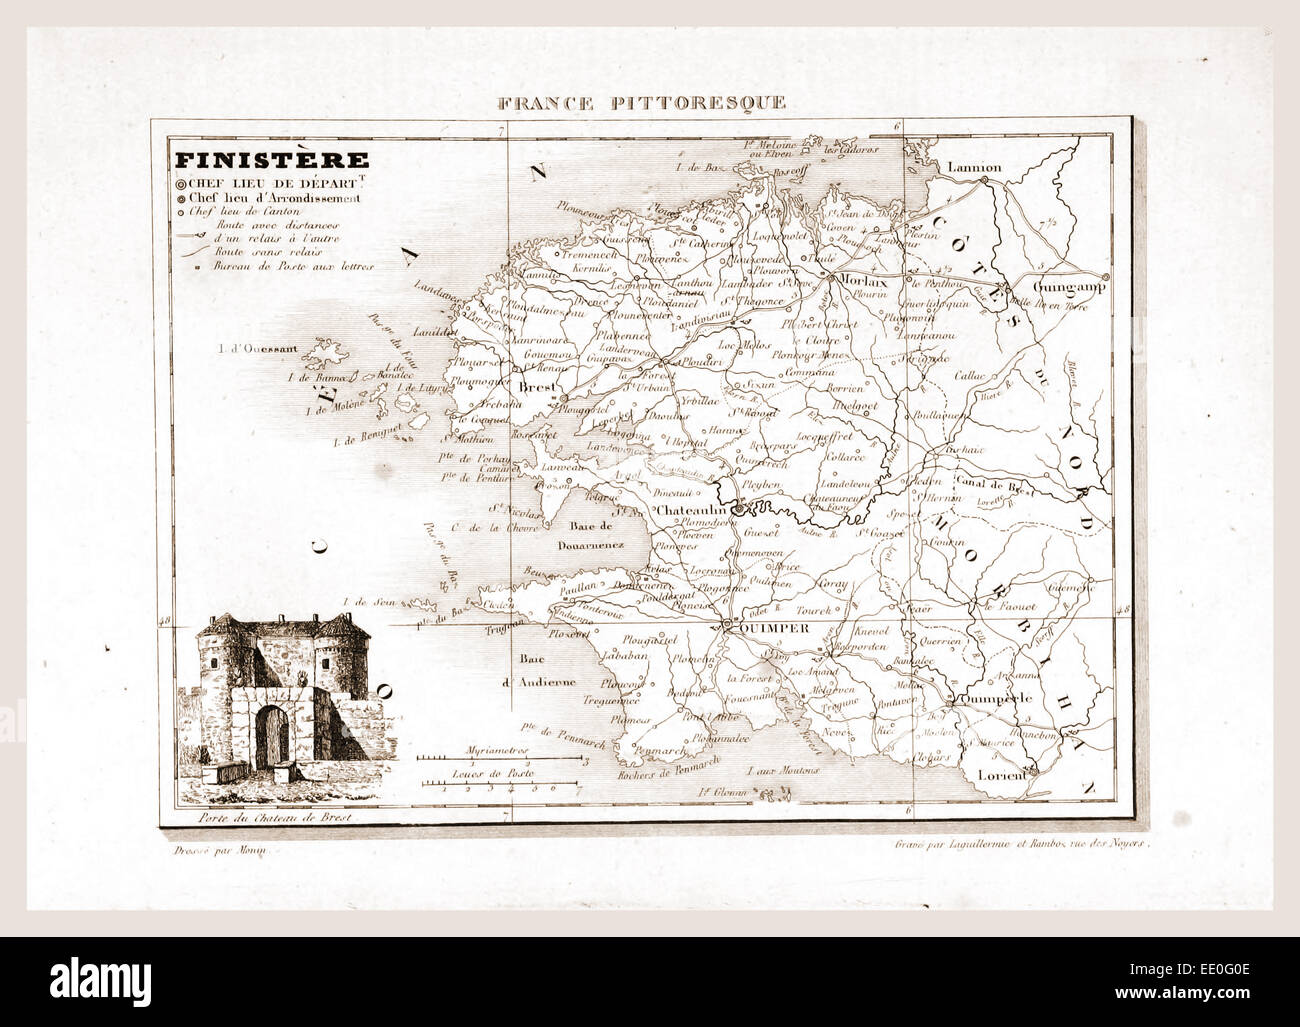 France pittoresque, Finistere, map, 19th century engraving Stock Photo ...